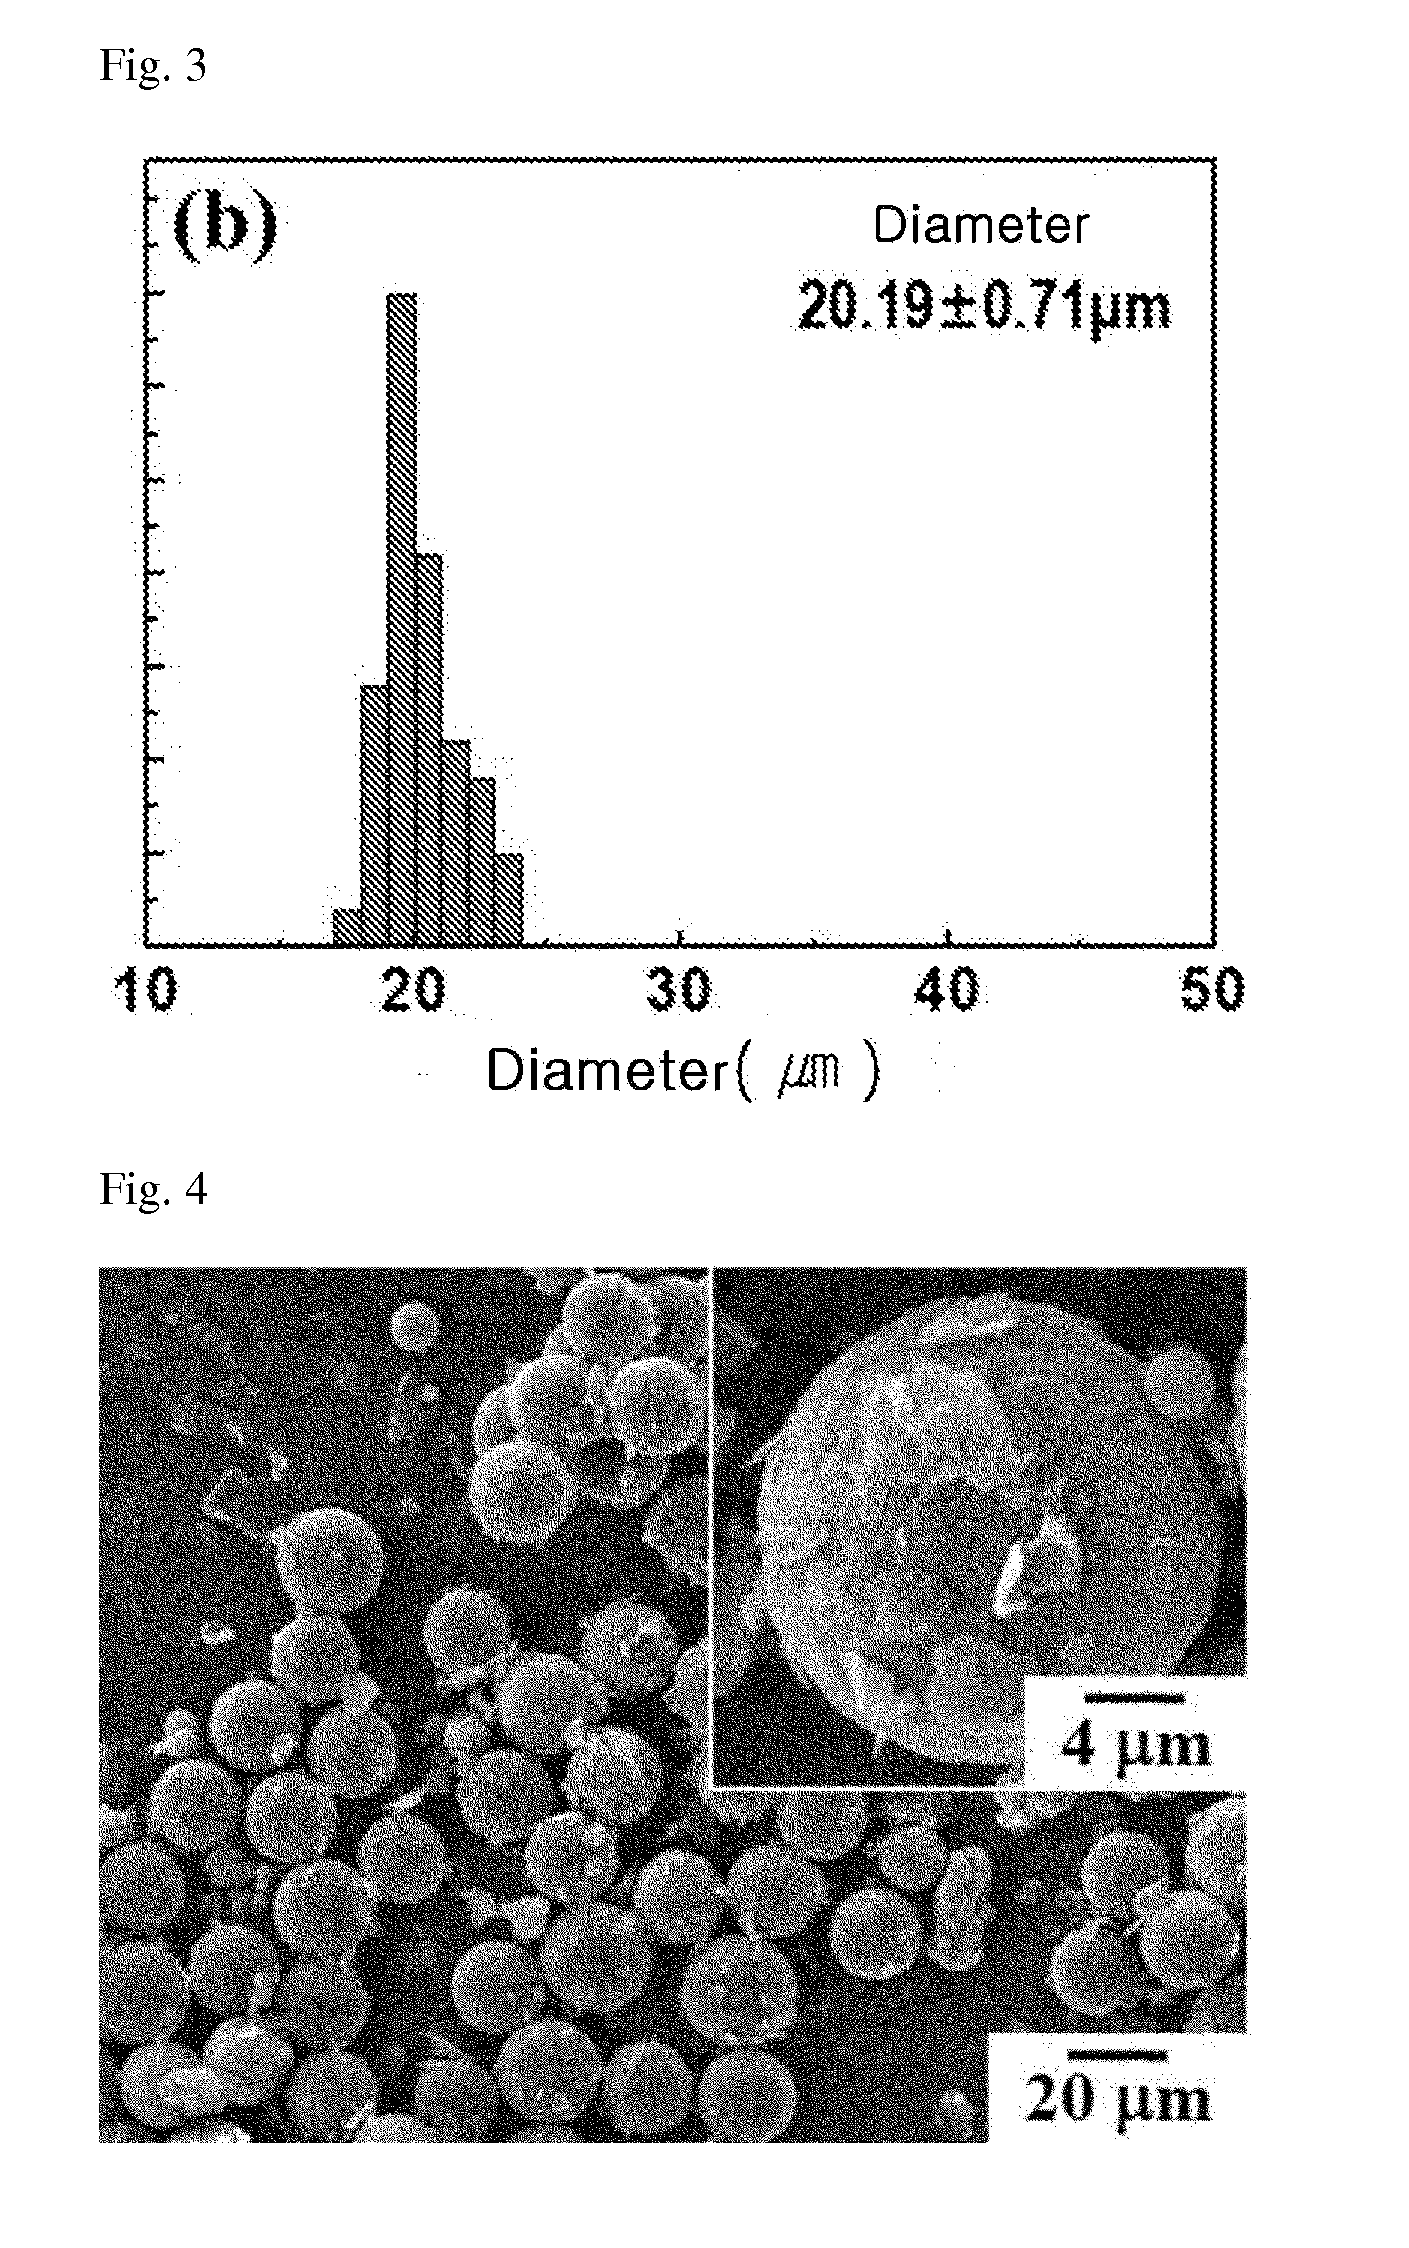 Thermally Conductive Ceramic-Polymer Composite and Method of Preparing the Same